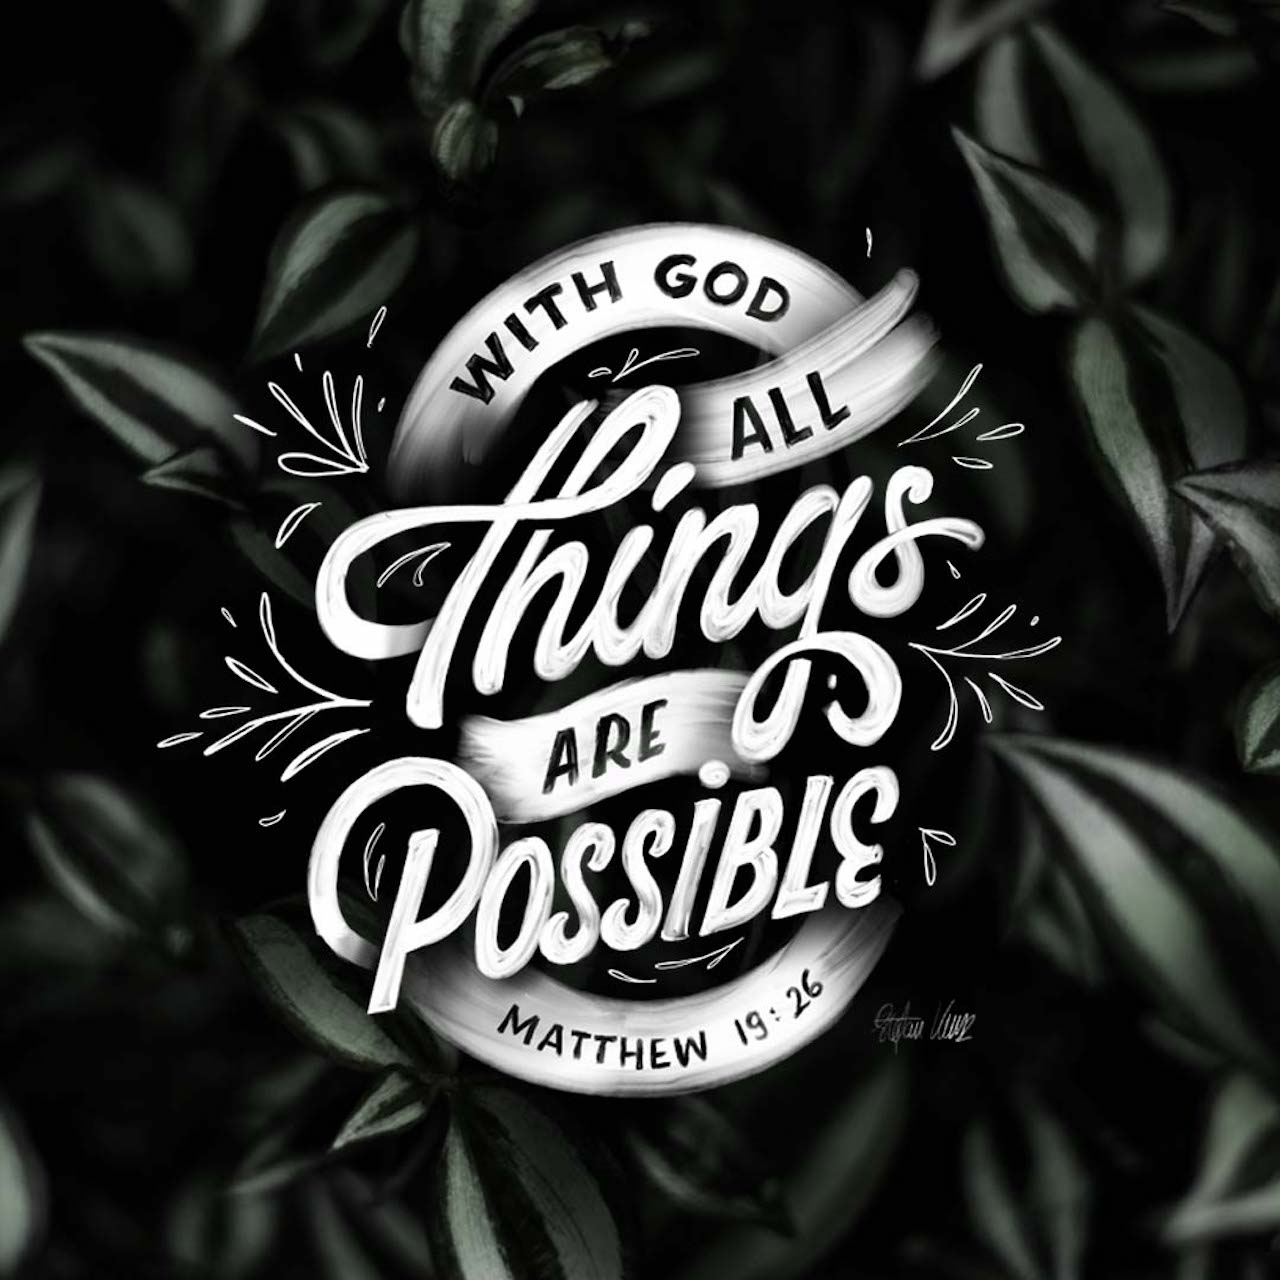 Jesus looked at them intently and said, “Humanly speaking, it is impossible. But with God everything is possible.” Matthew 19:26 NLT https://bible.com/bible/116/mat.19.26.NLT